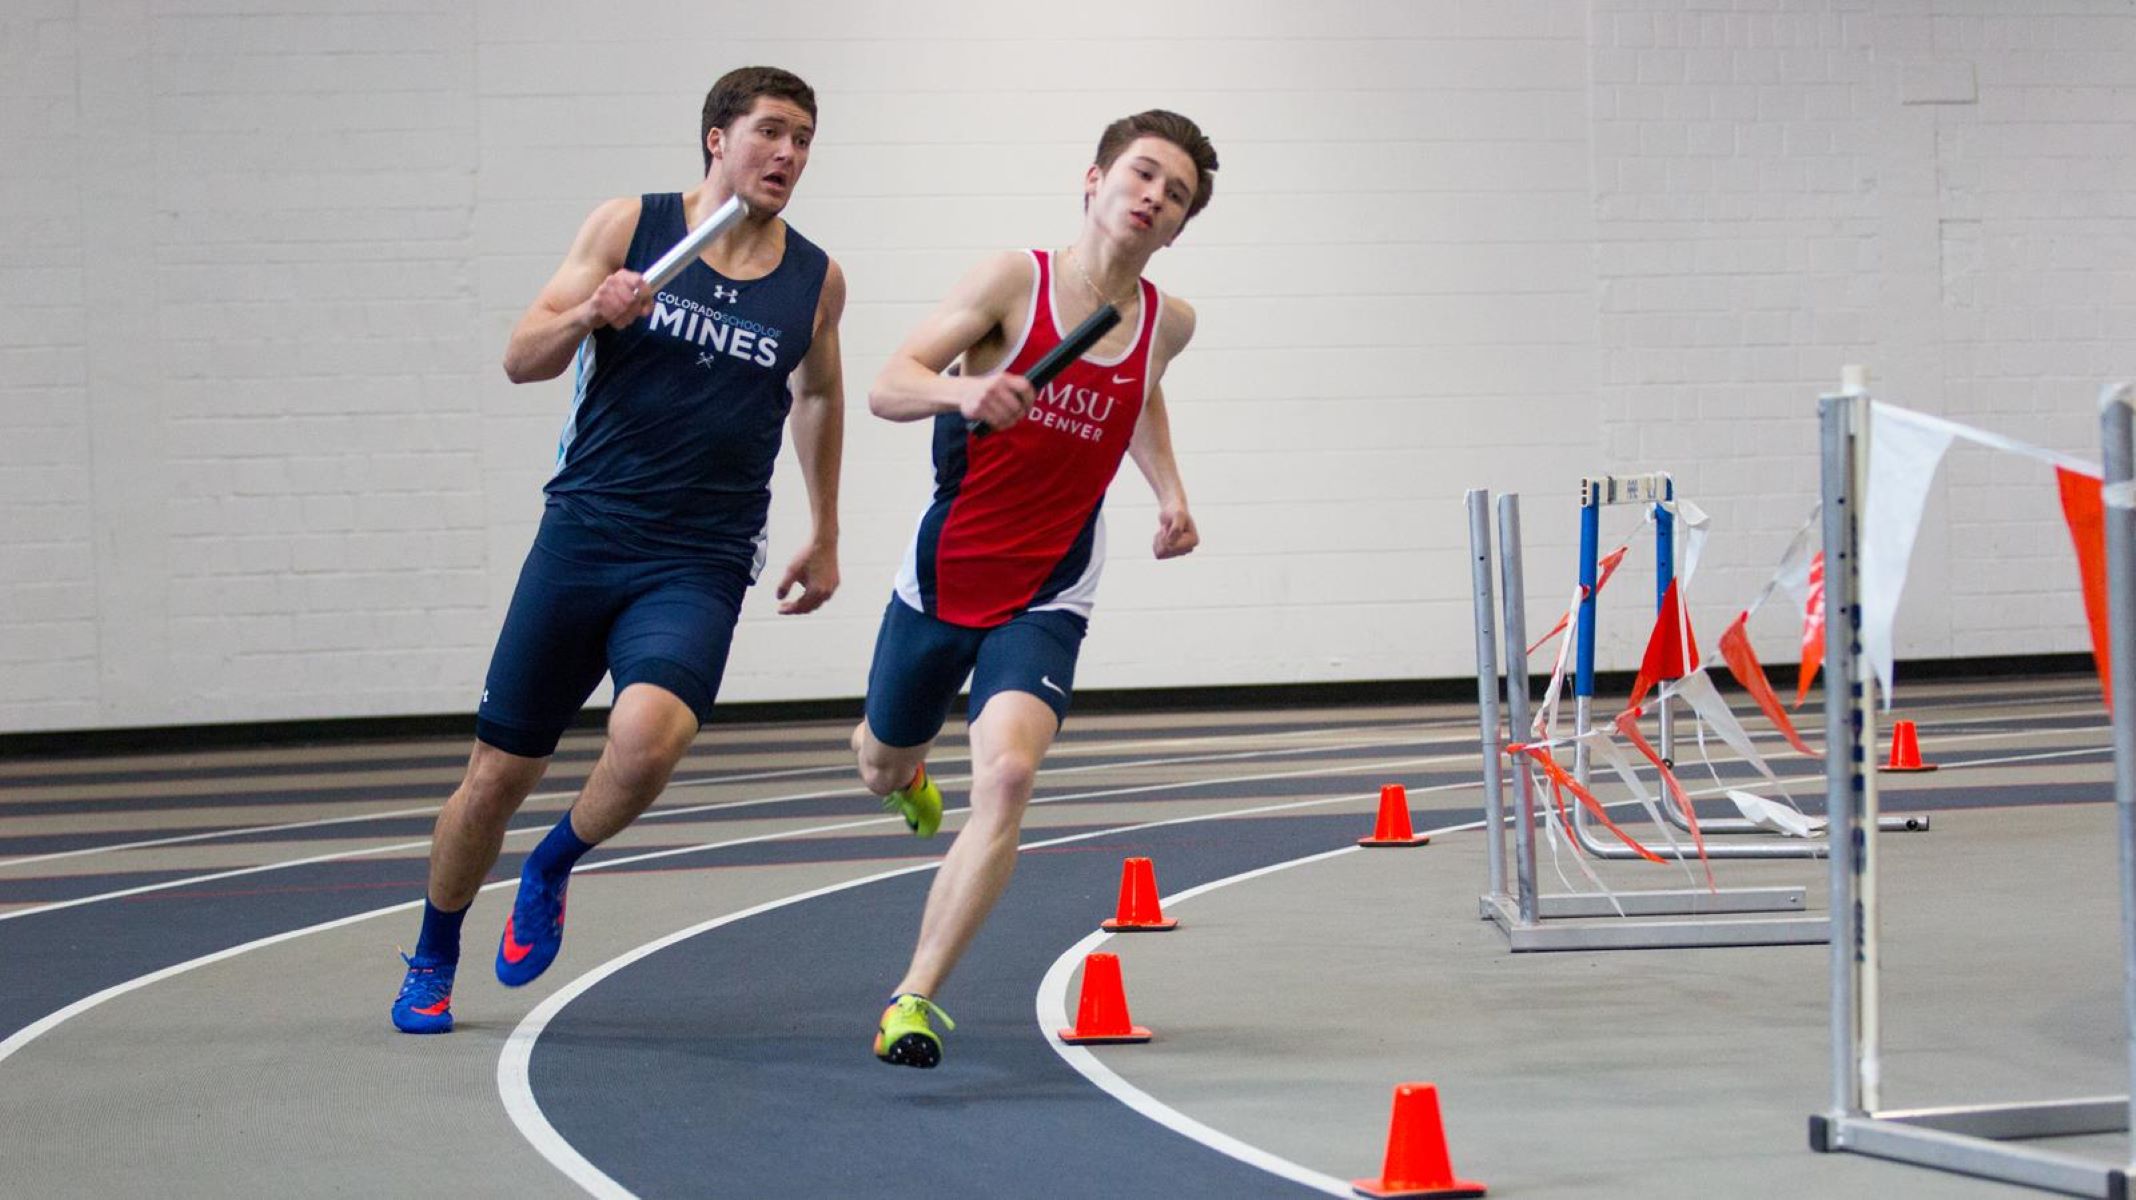 What Are The Indoor Track And Field Events?